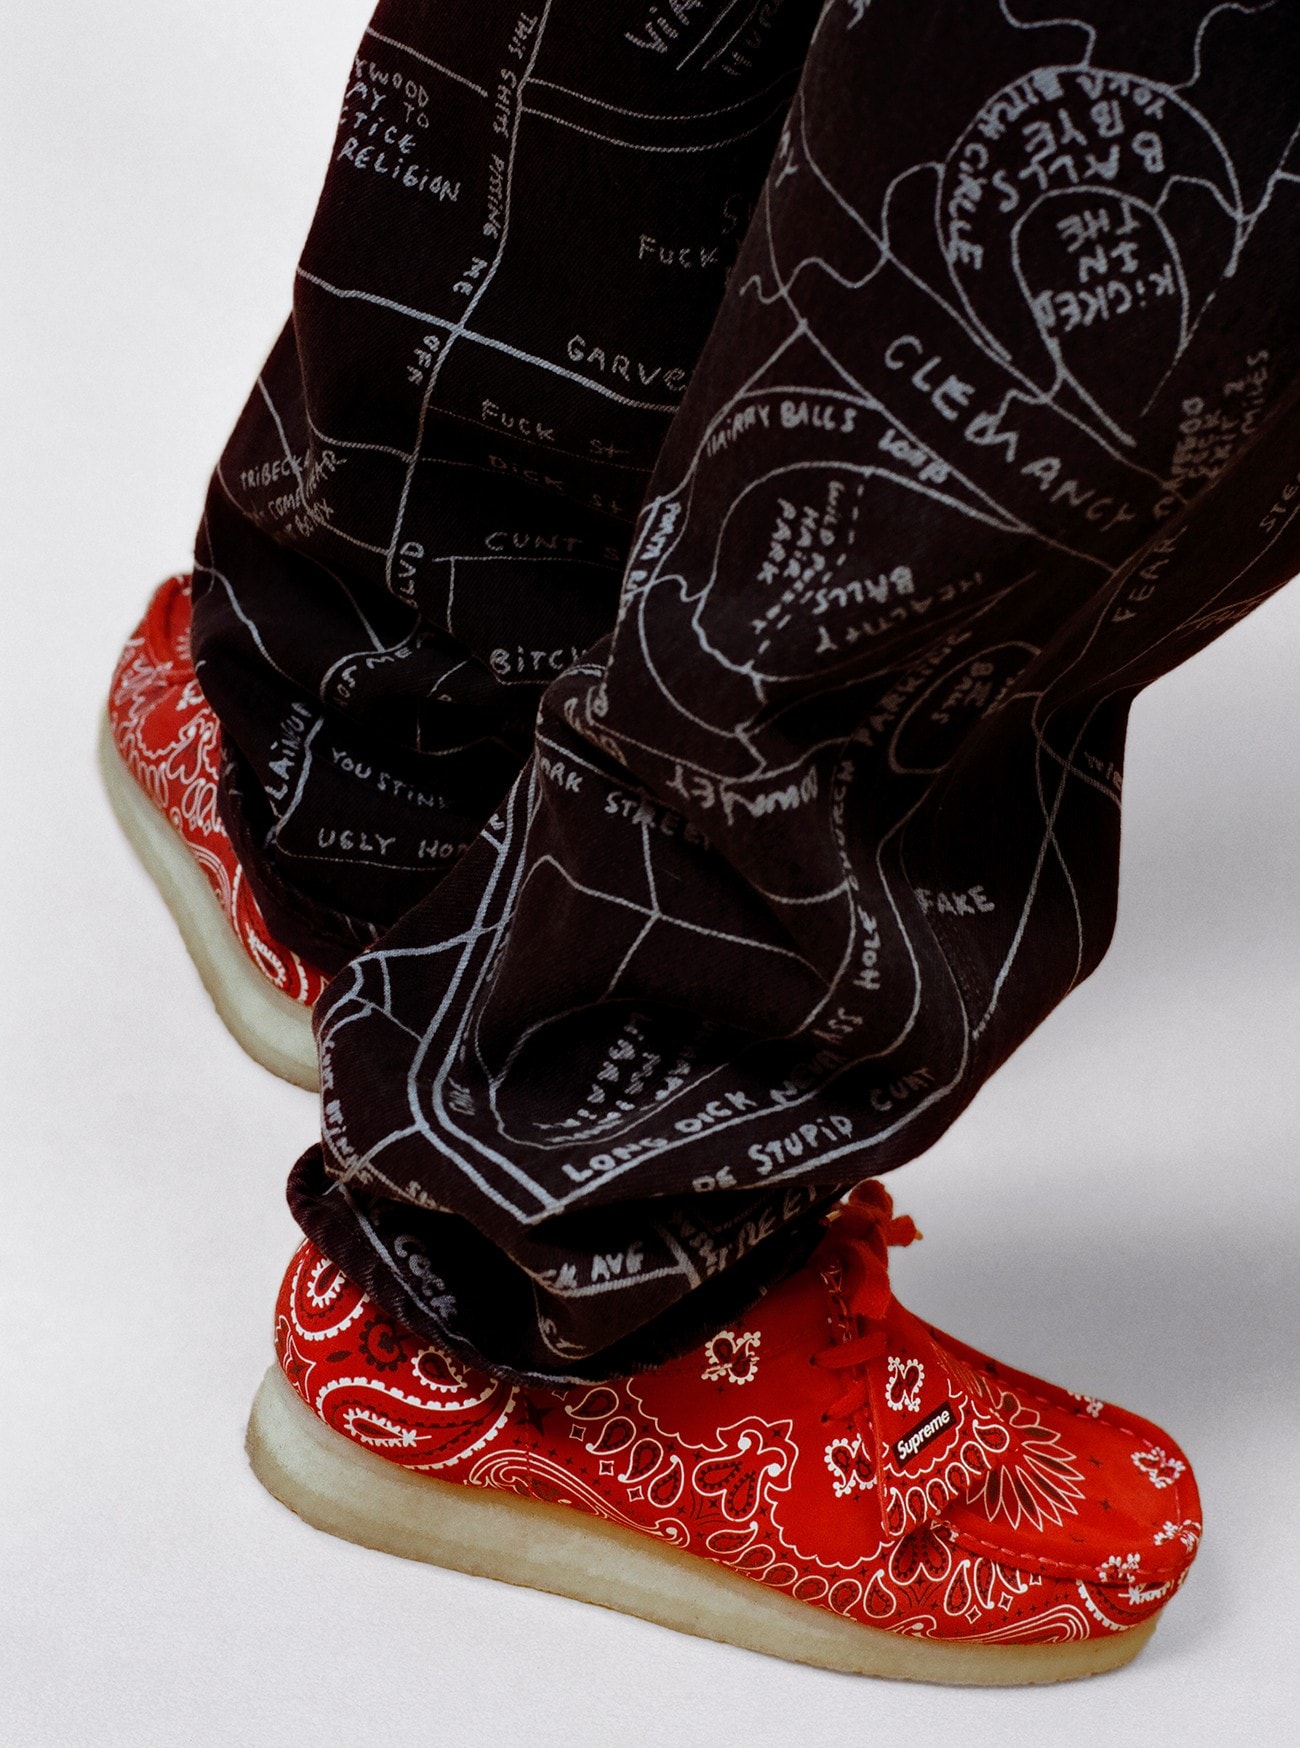 Supreme Clarks Originals 2019 Summer Wallabees Wallabee Footwear Shoes Collaboration Red Paisley Pattern